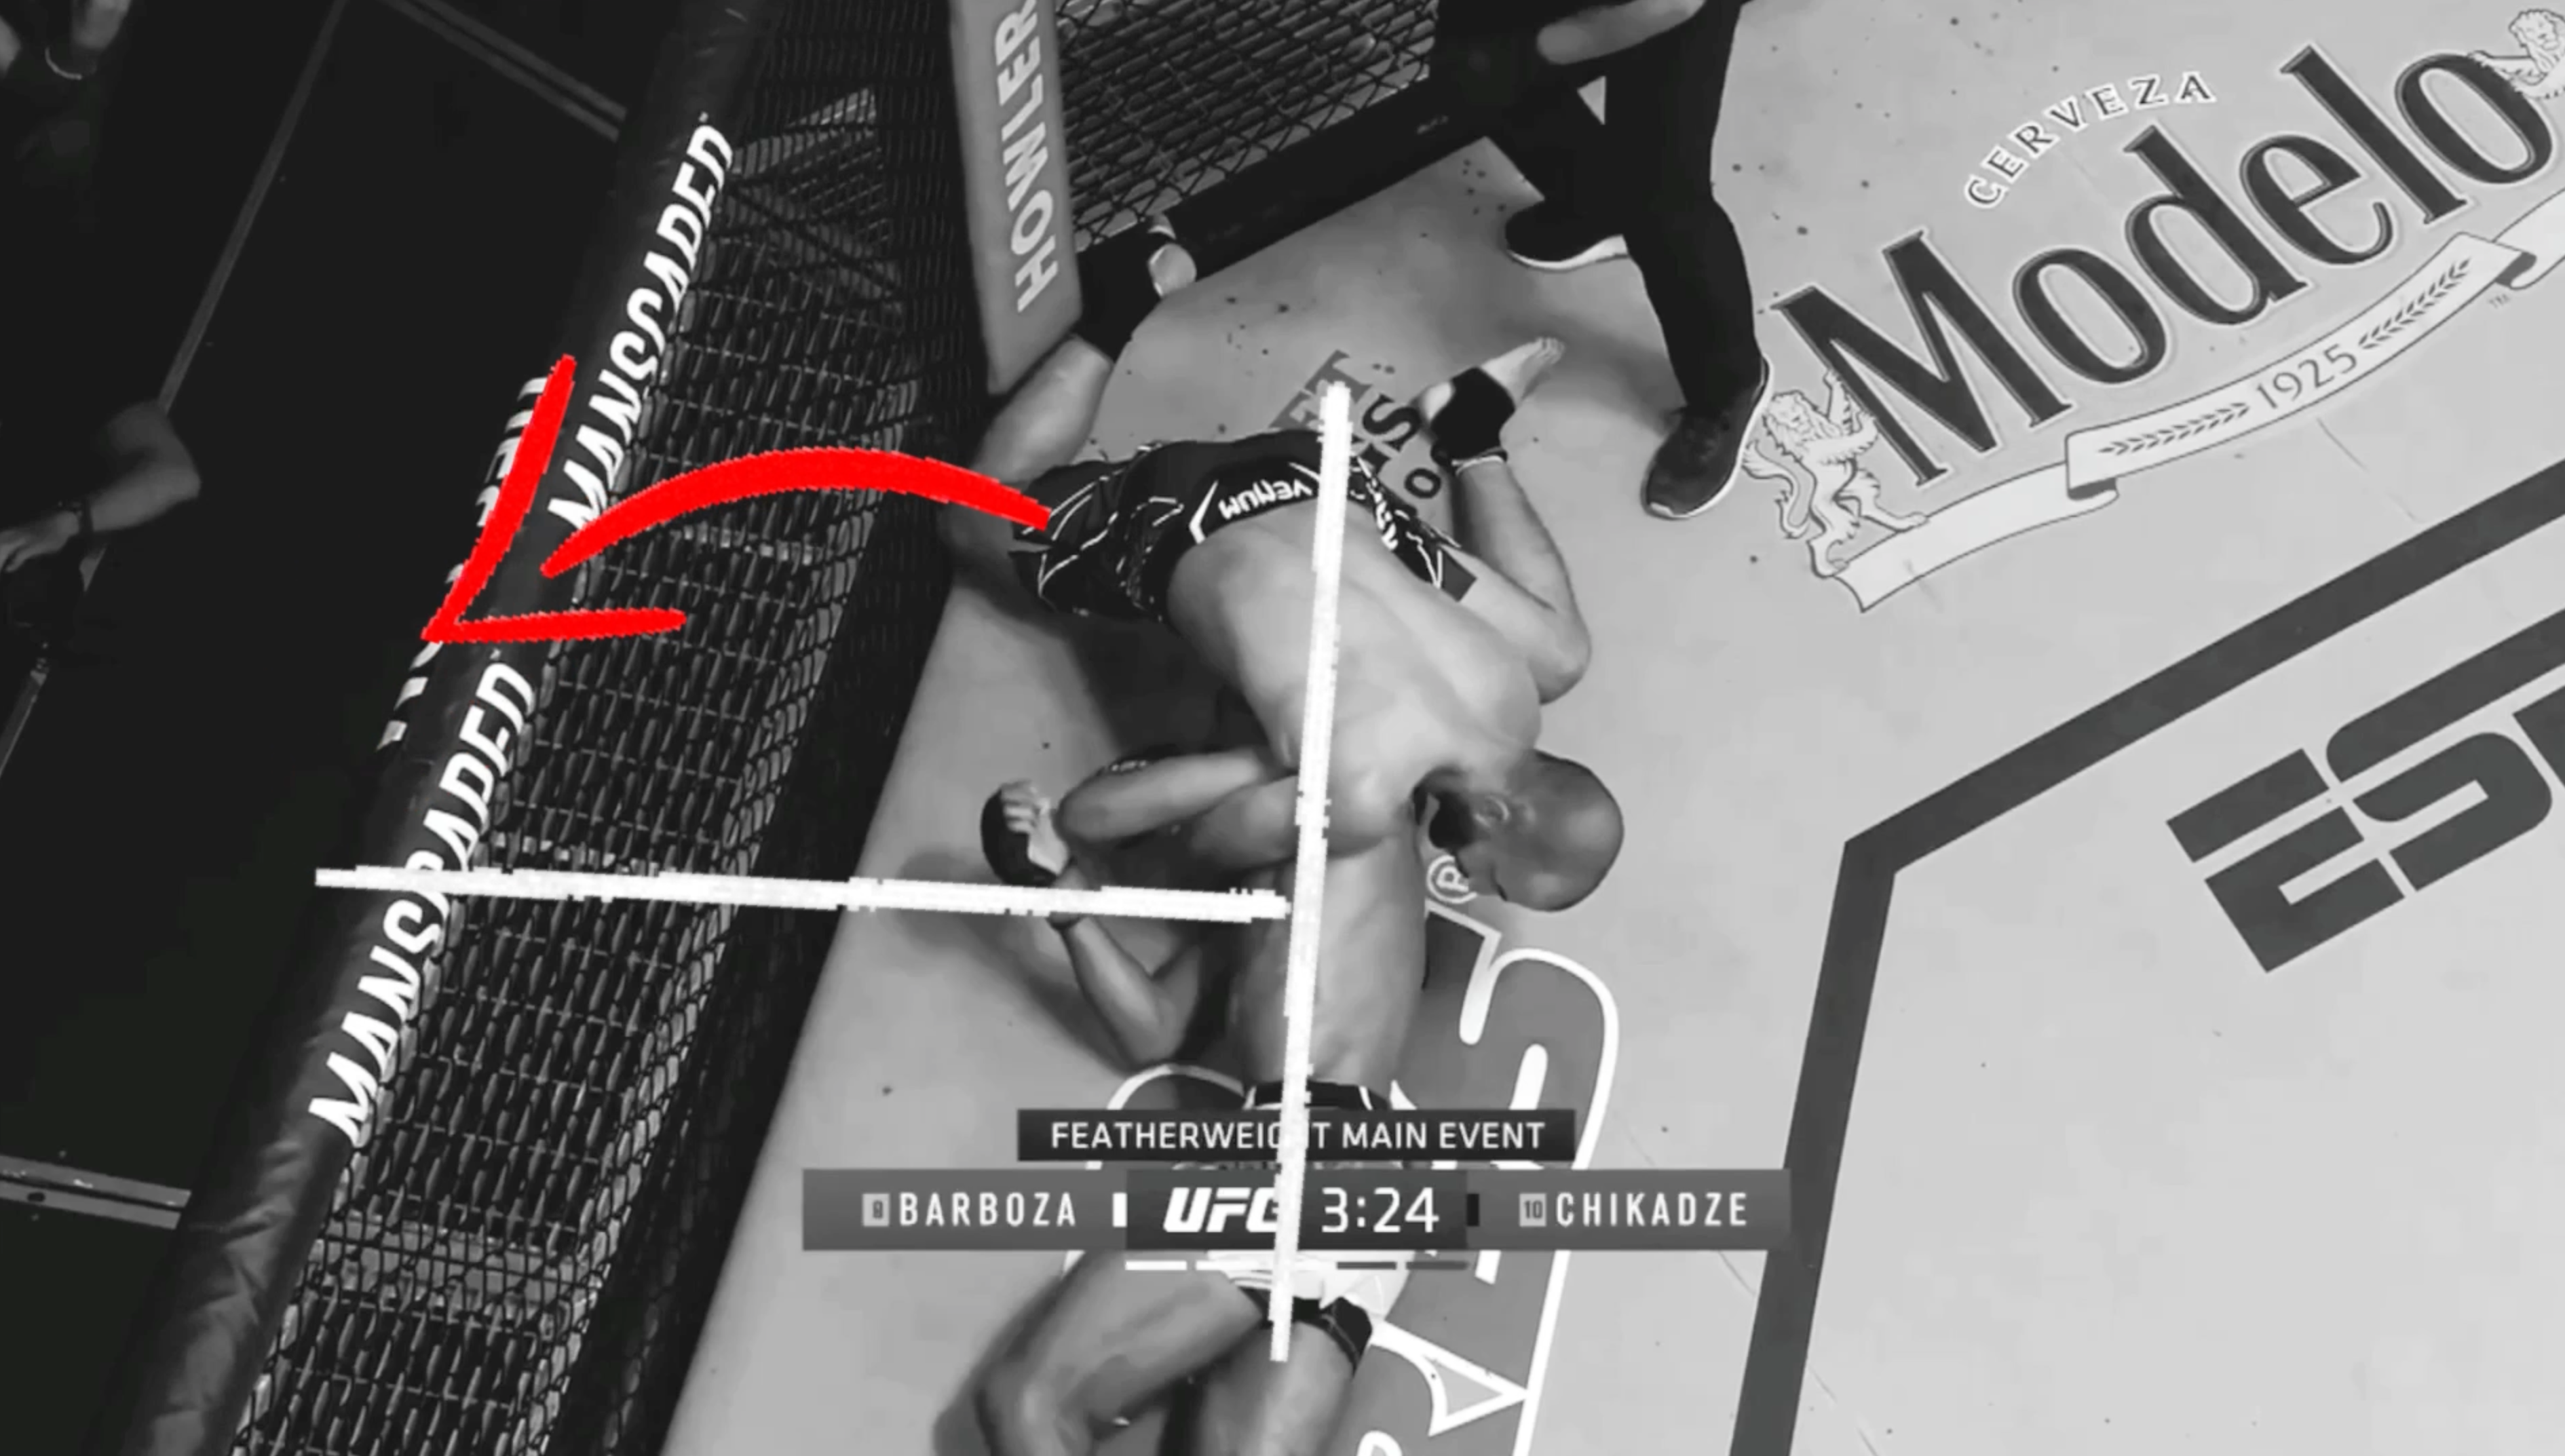 Giga Chikadze showed off a brief but surprising submission chain during his first UFC main event.